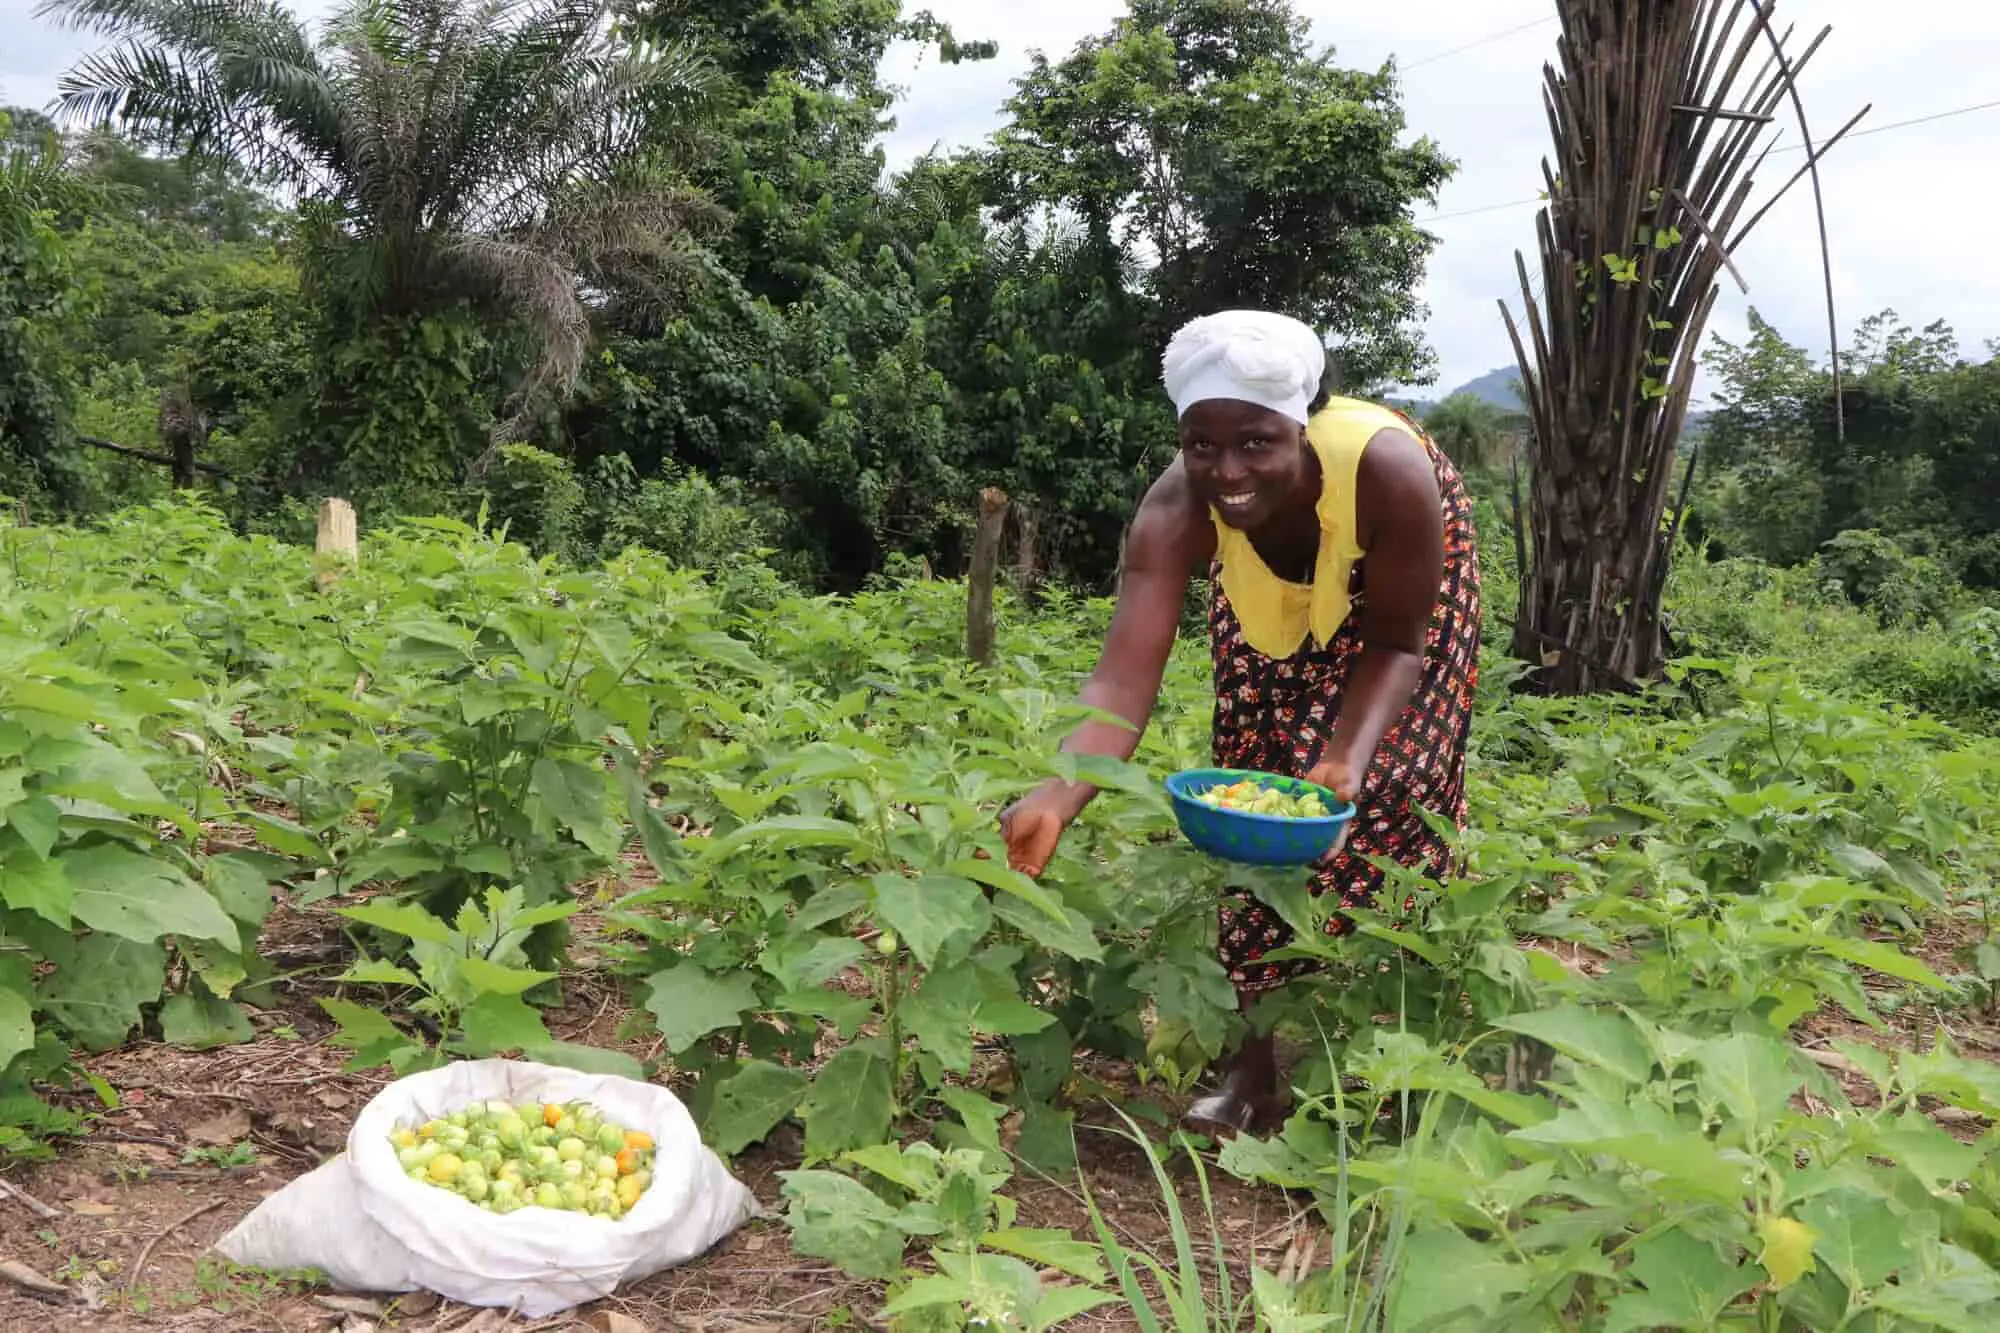 Small-scale producers key to attaining food security and ending hunger, Working in development